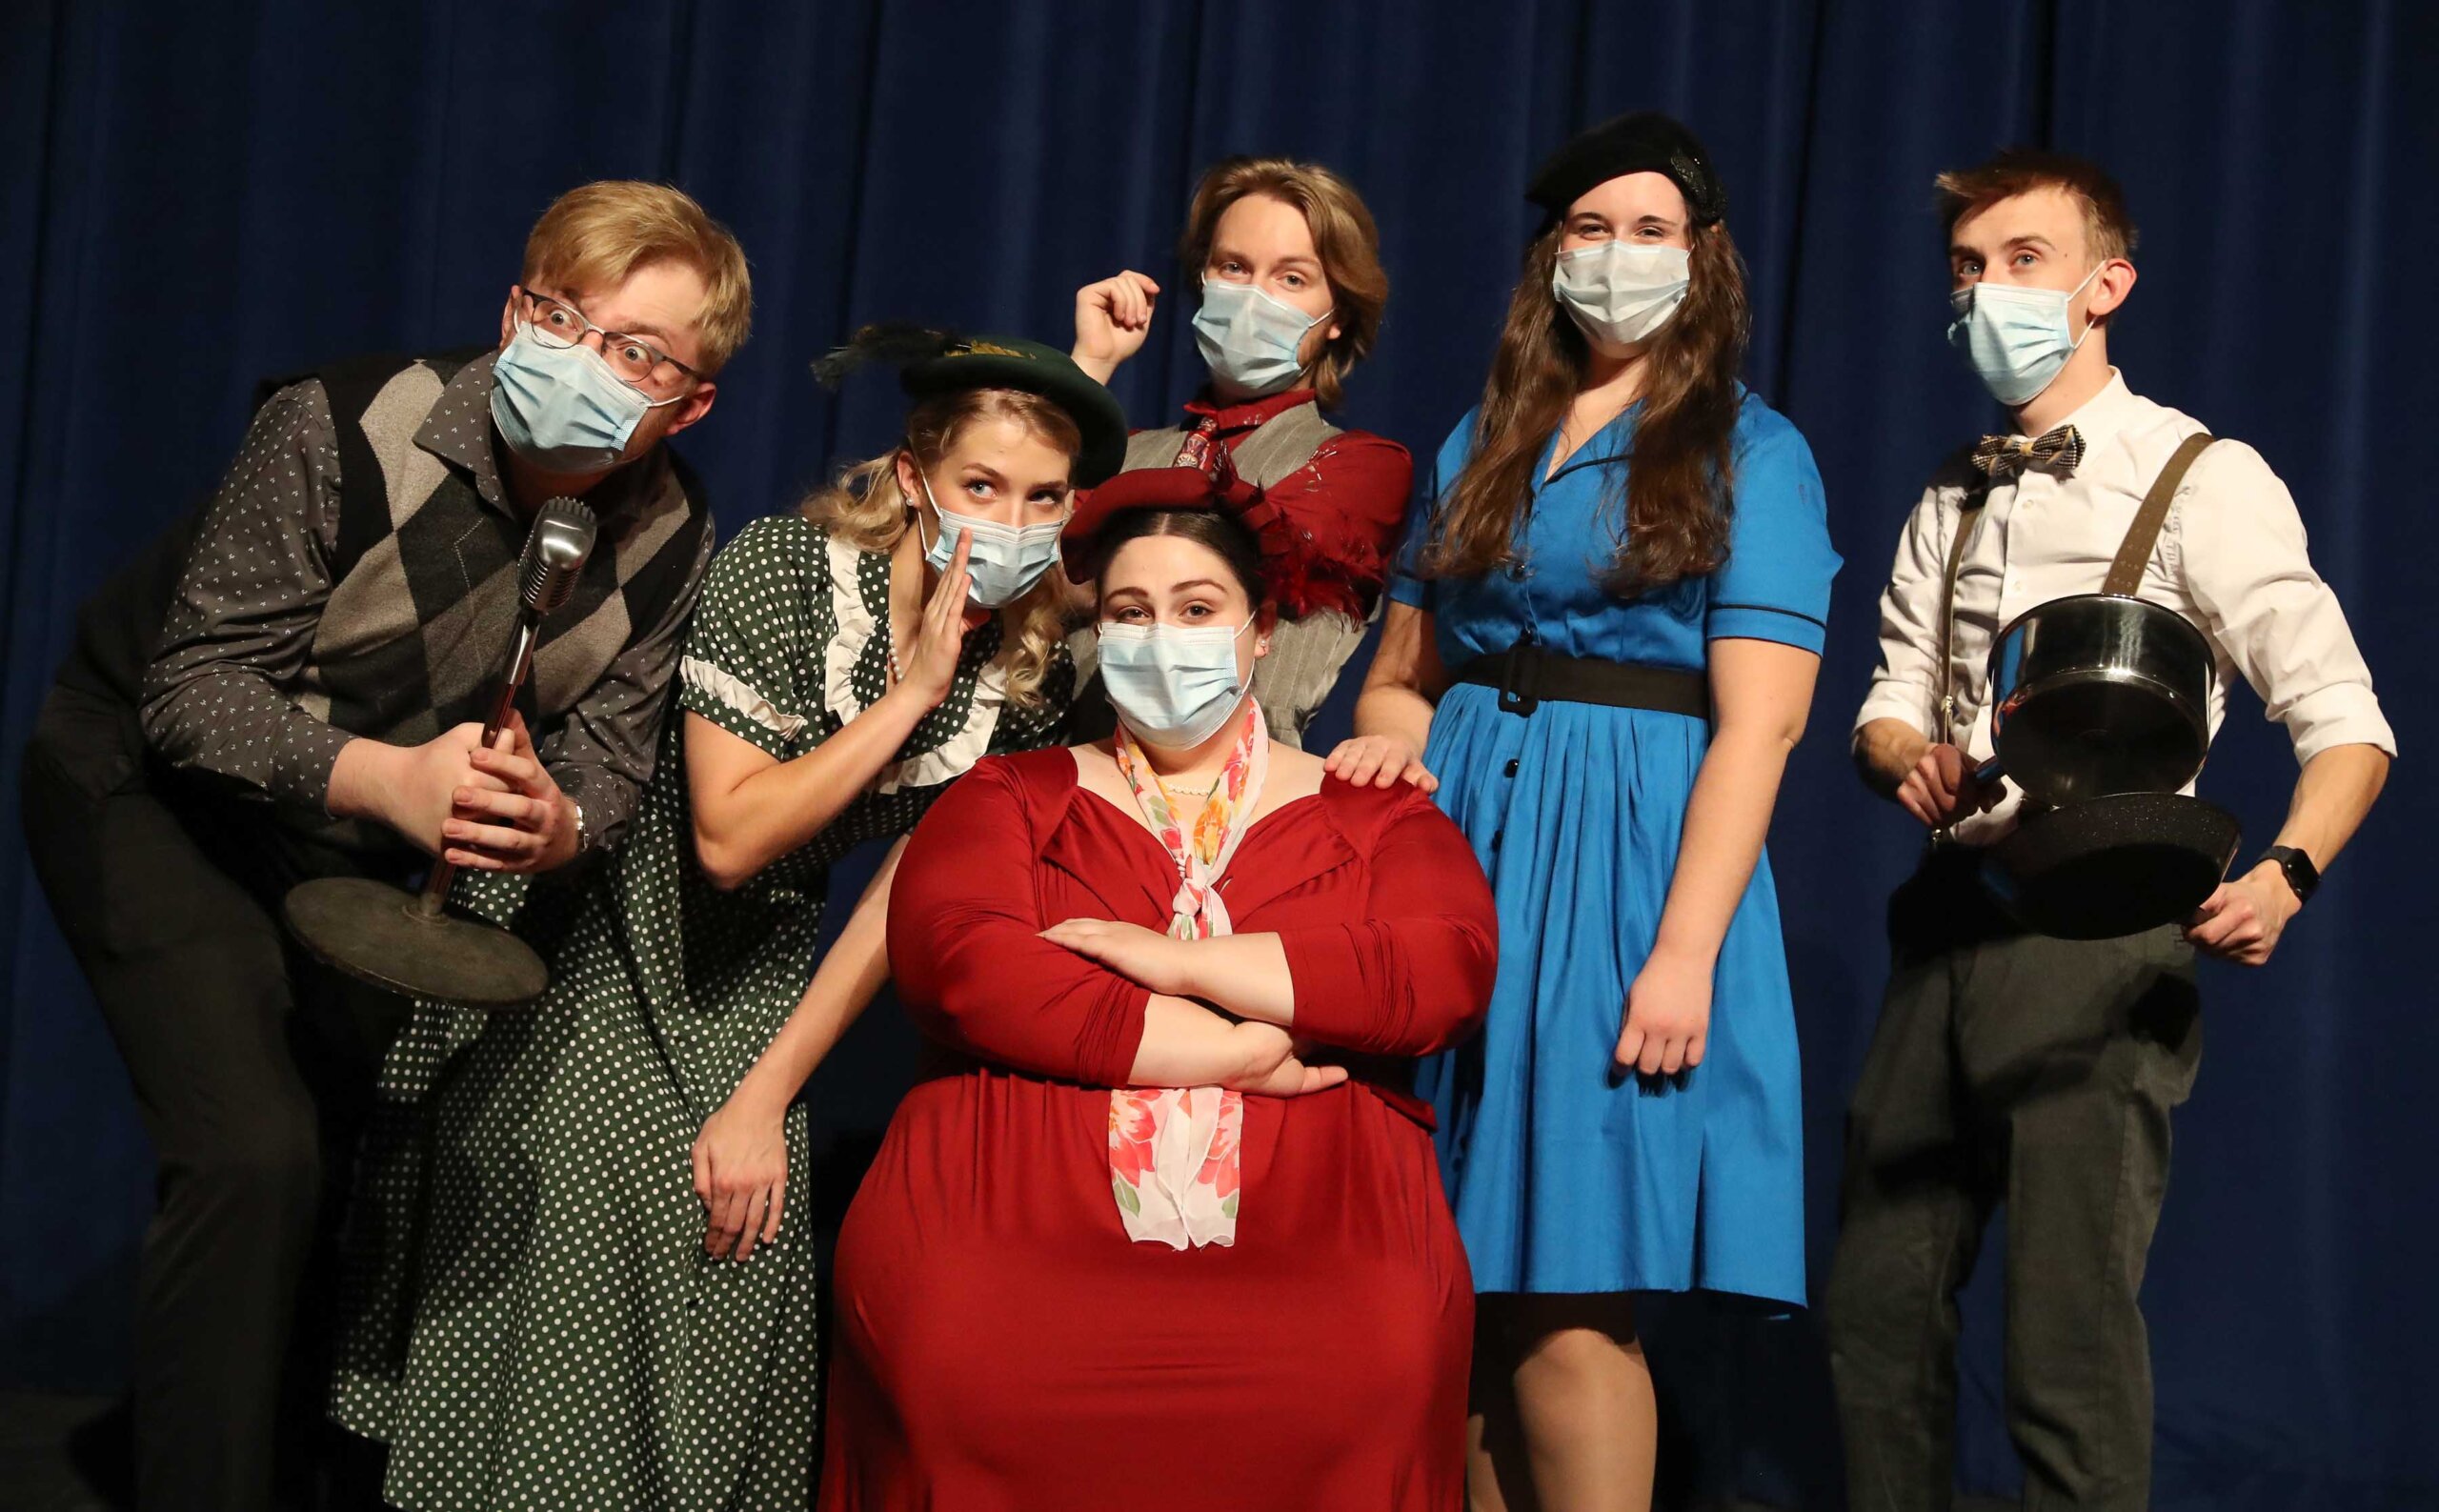 From left, UNK students Will Frederick, Hannah Petersen, Terran Homburg, Maximus Wohler, Cassie Brown and Bryce Emde are part of the upcoming Opera Workshop production “The Old Maid and the Thief.” The live radio opera will be presented 2 p.m. Sunday on KLPR 91.1 FM and via livestream.